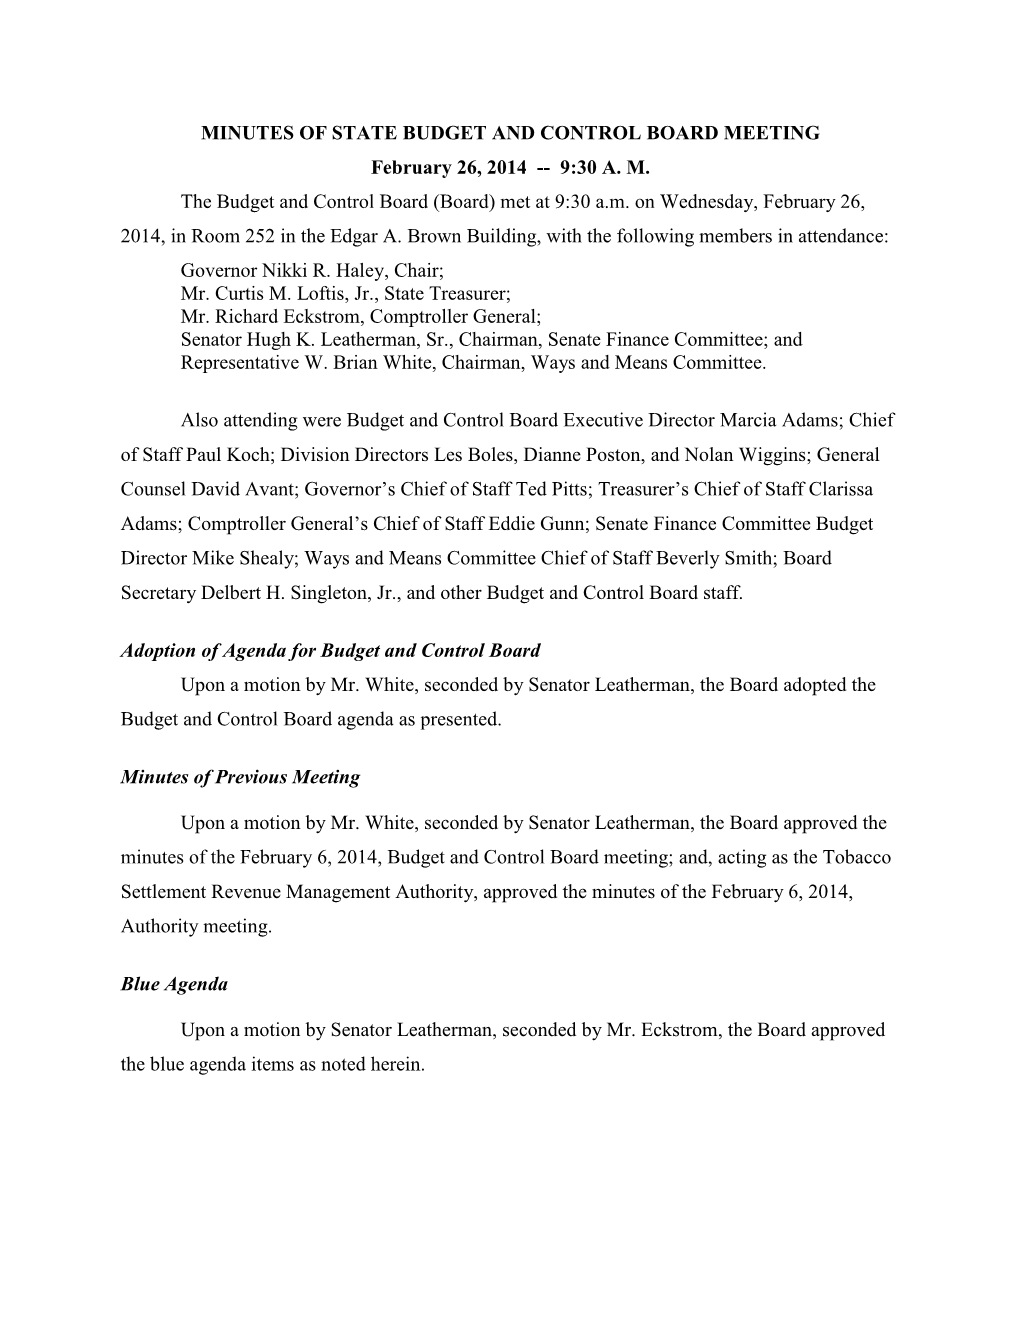 MINUTES of STATE BUDGET and CONTROL BOARD MEETING February 26, 2014 -- 9:30 A